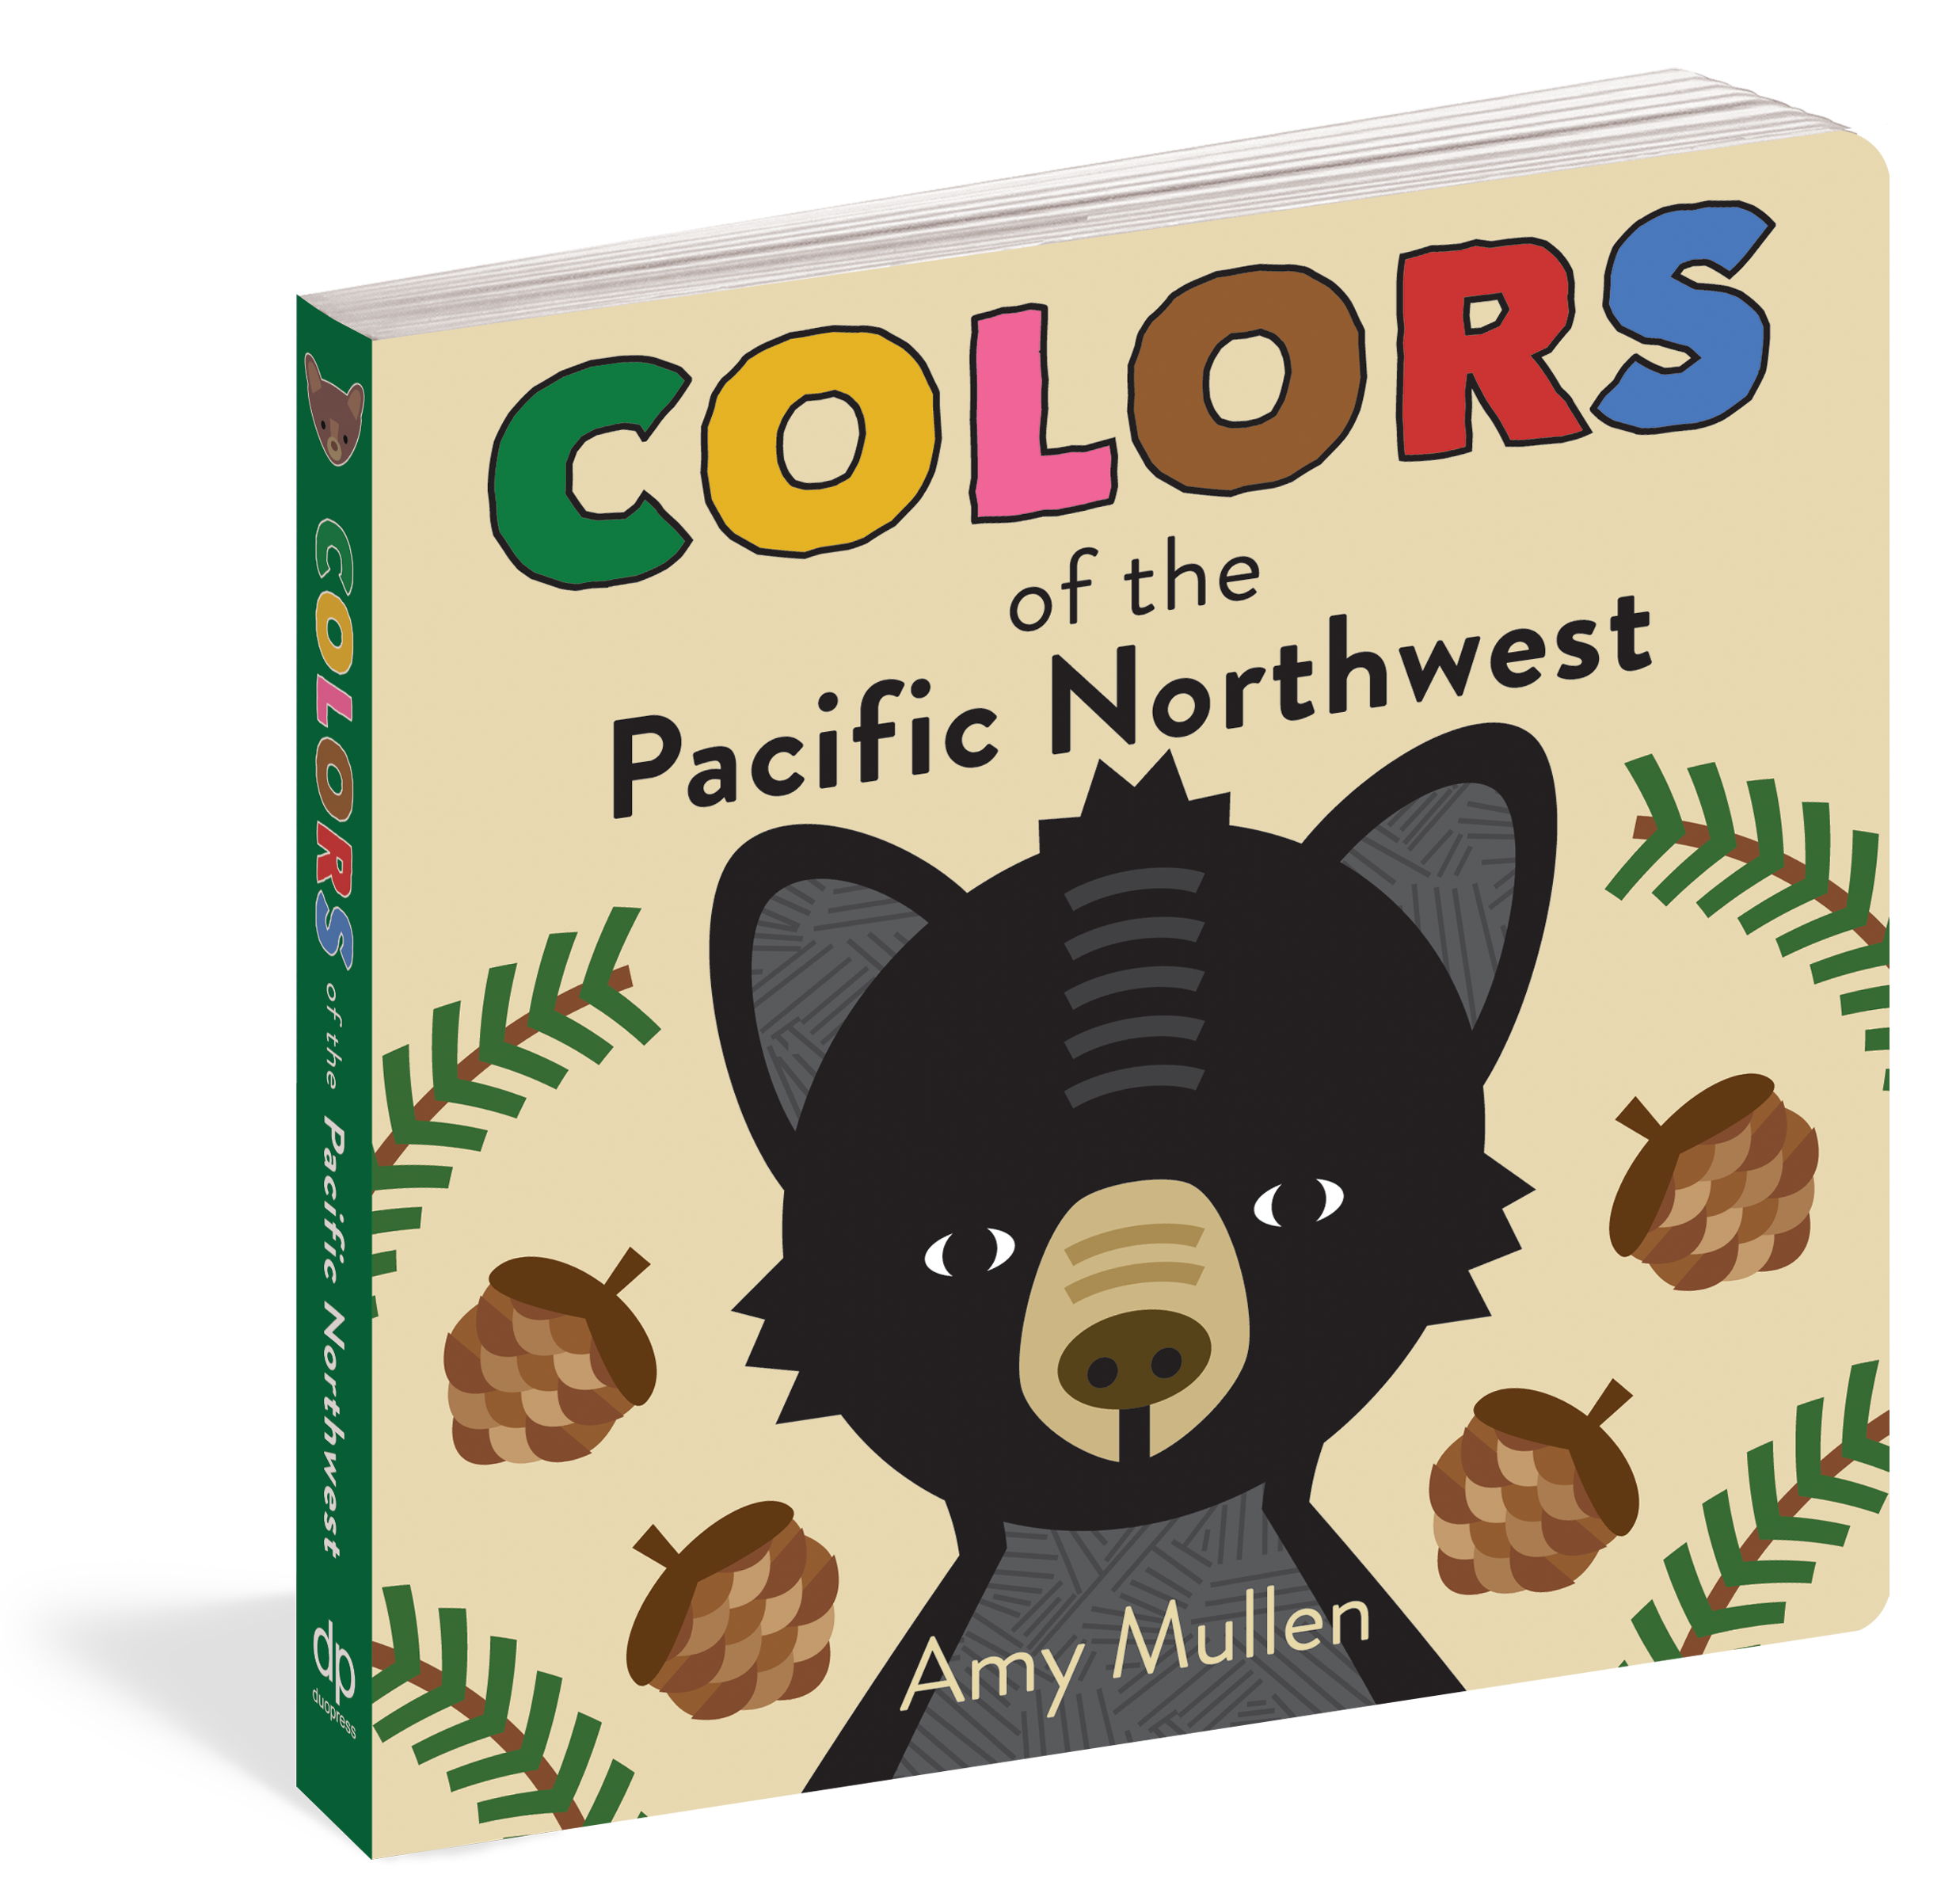 COLORS OF THE PACIFIC NORTHWEST